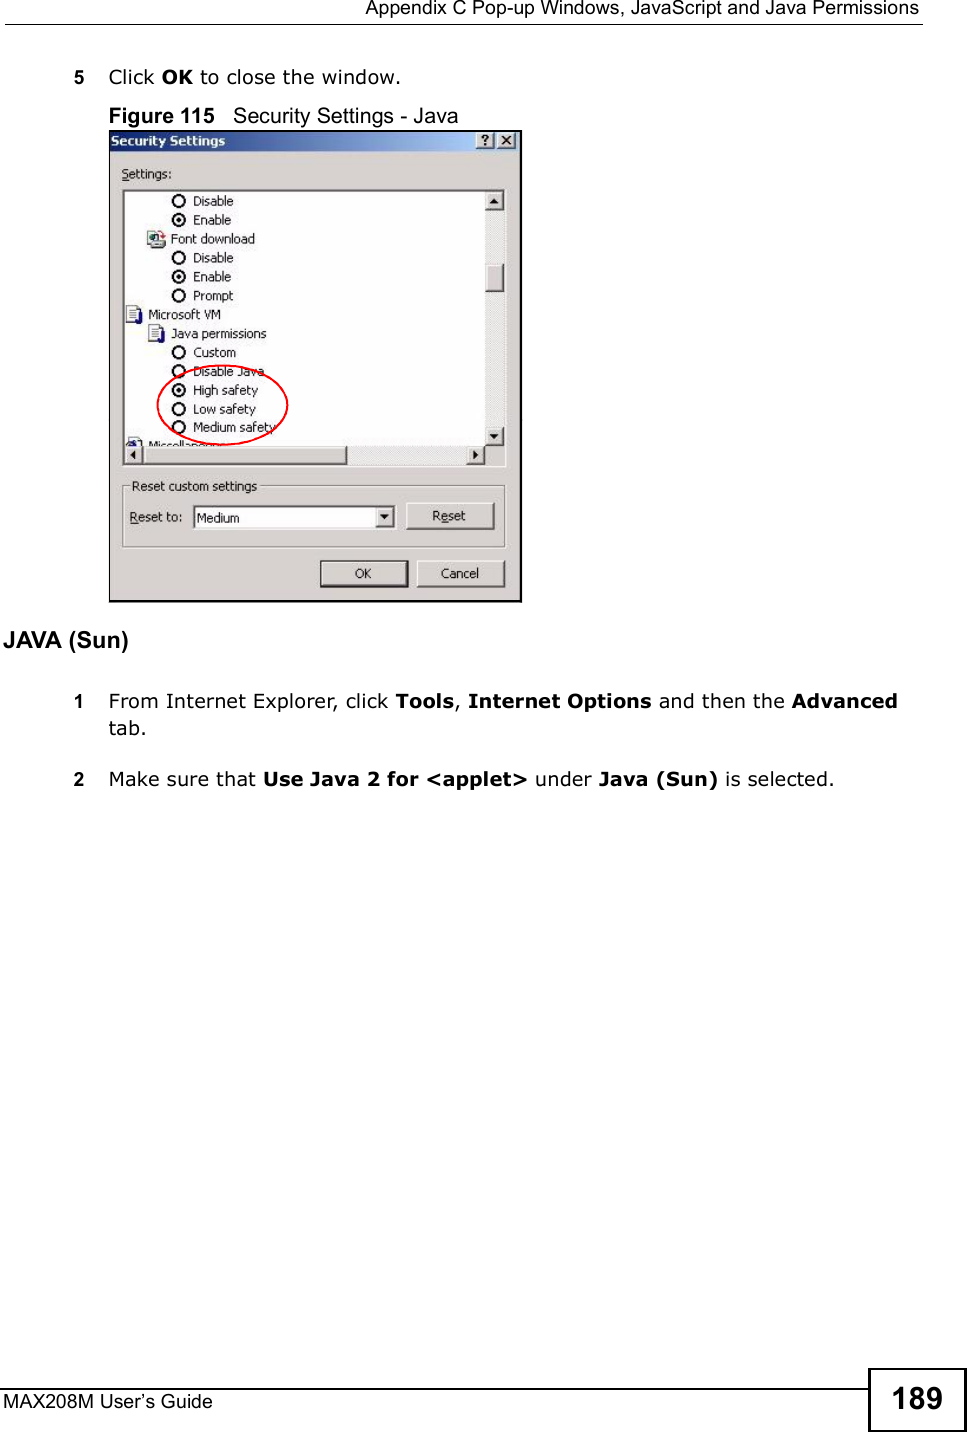  Appendix CPop-up Windows, JavaScript and Java PermissionsMAX208M User s Guide 1895Click OK to close the window.Figure 115   Security Settings - Java JAVA (Sun)1From Internet Explorer, click Tools, Internet Options and then the Advanced tab. 2Make sure that Use Java 2 for &lt;applet&gt; under Java (Sun) is selected.